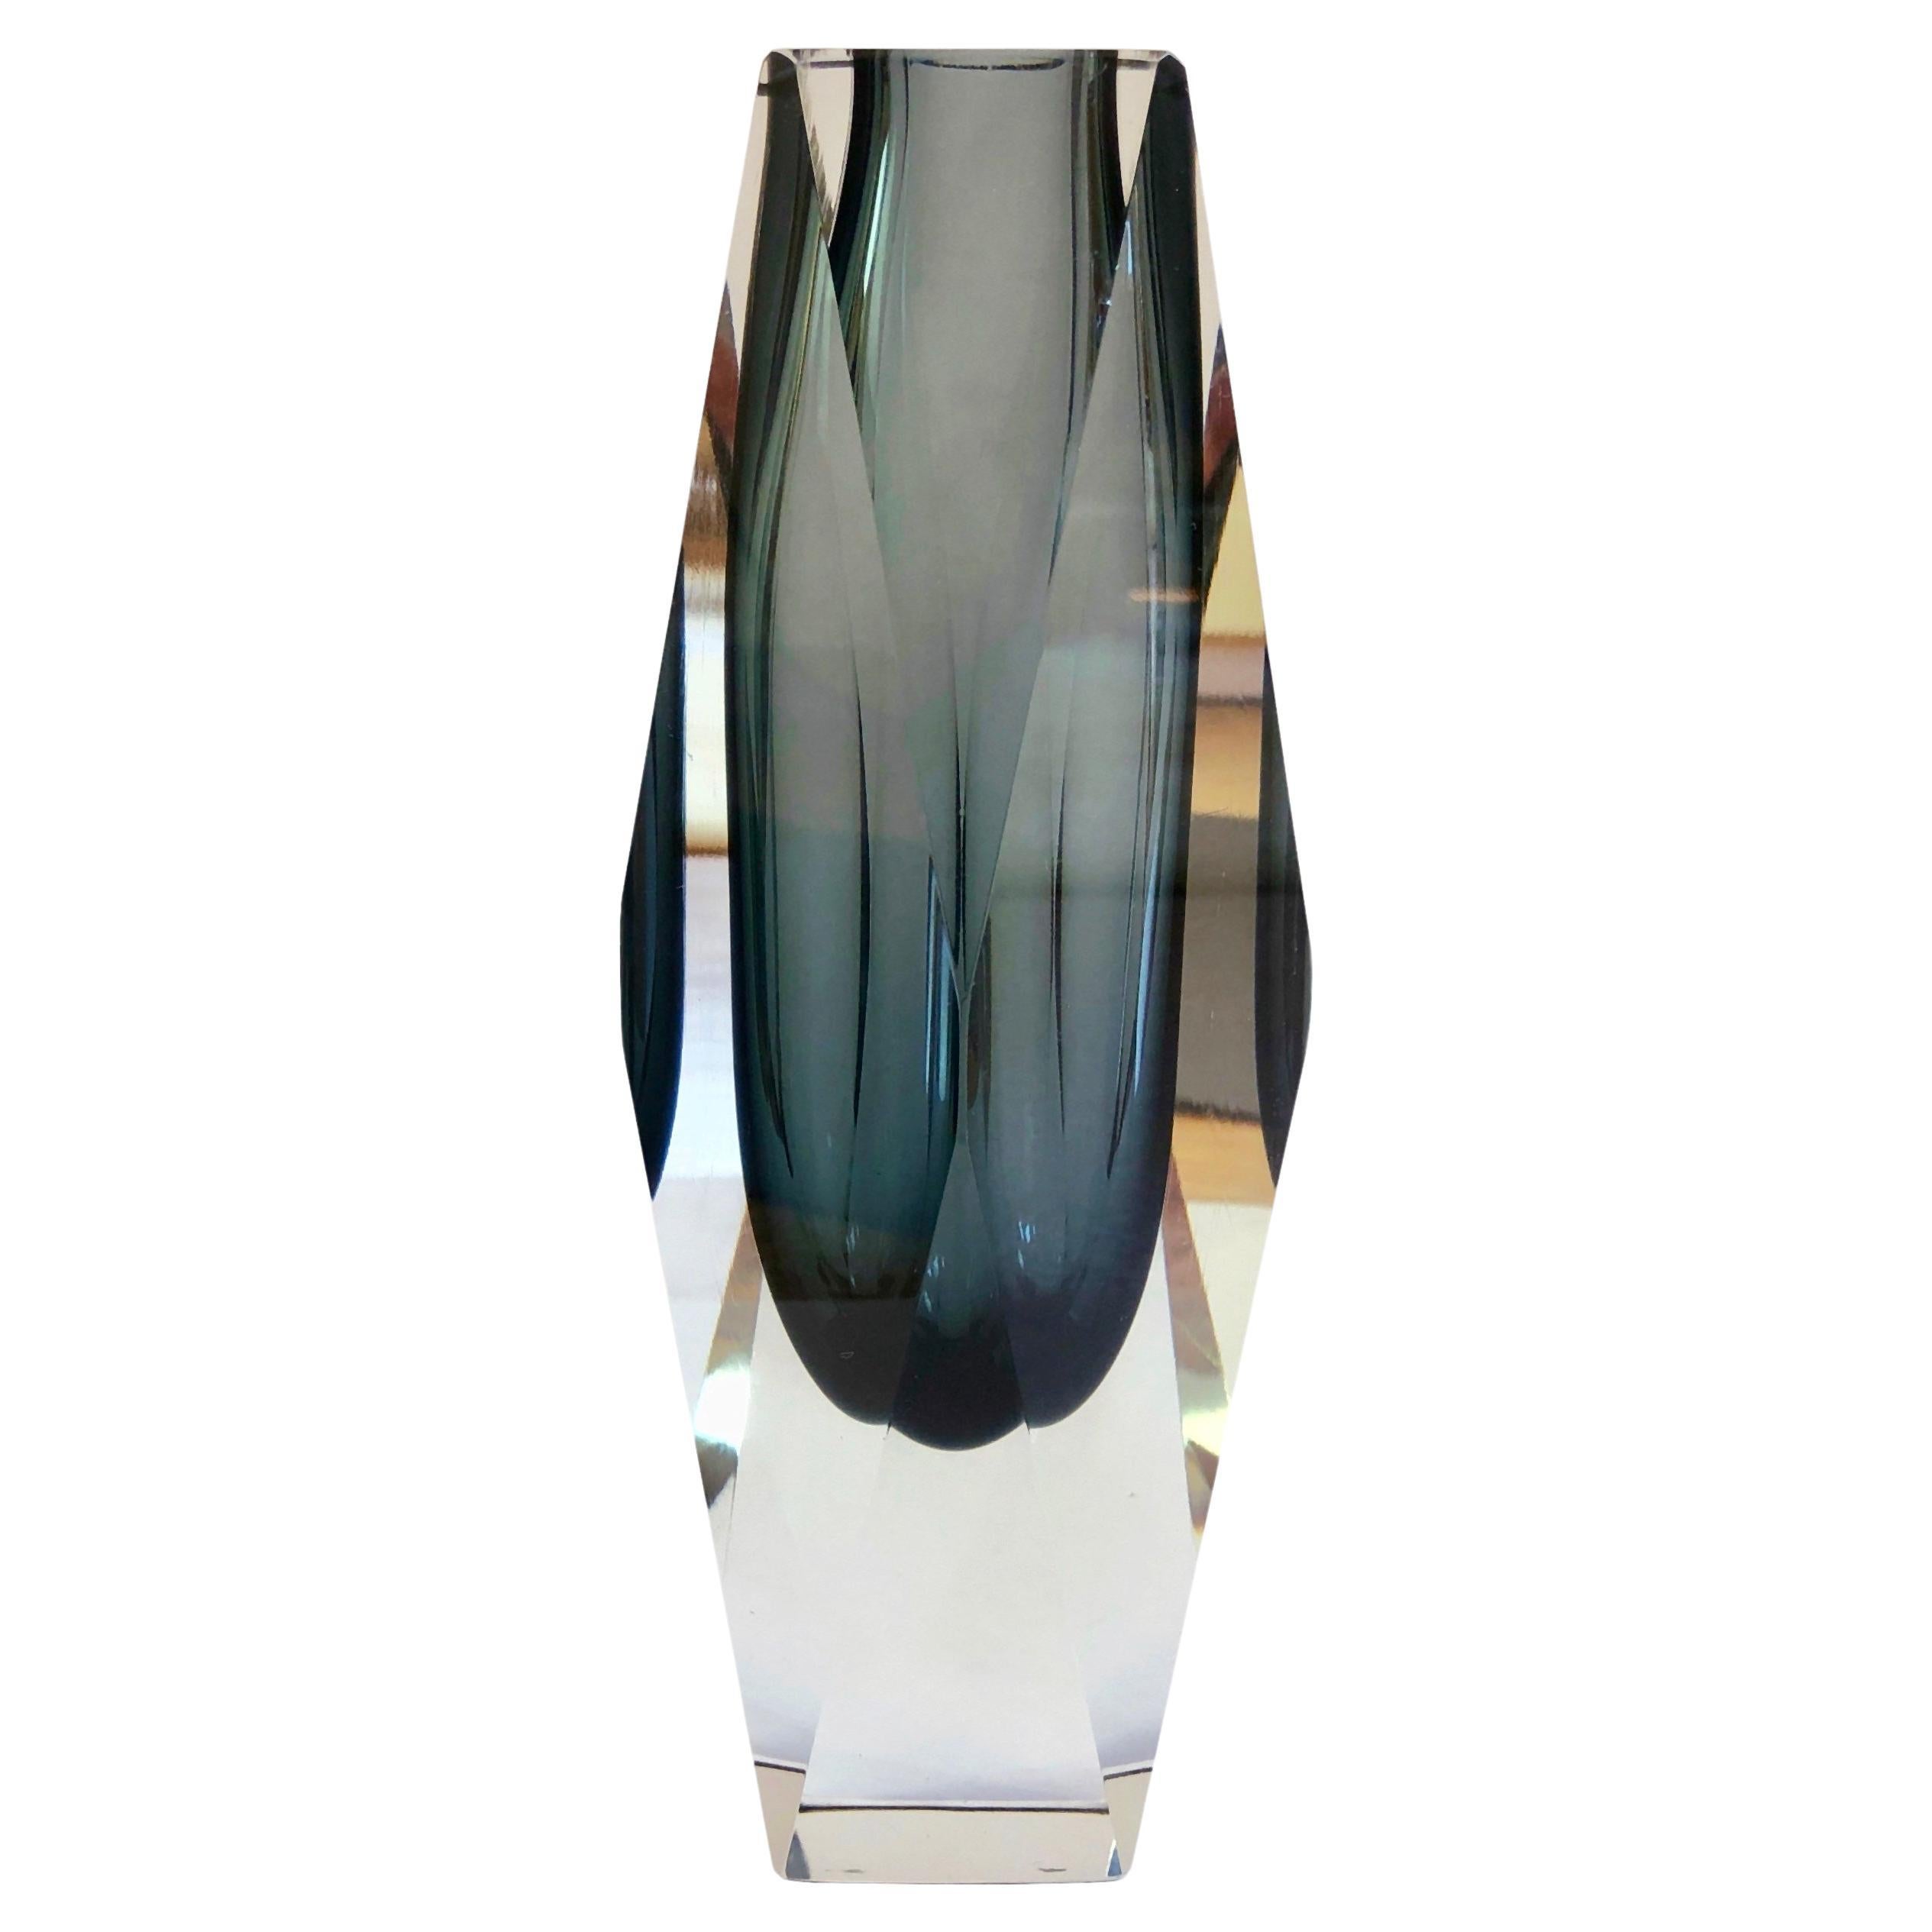 Large Mandruzzato Murano Sommerso Smoked Grey Clear Faceted Art Glass Vase For Sale